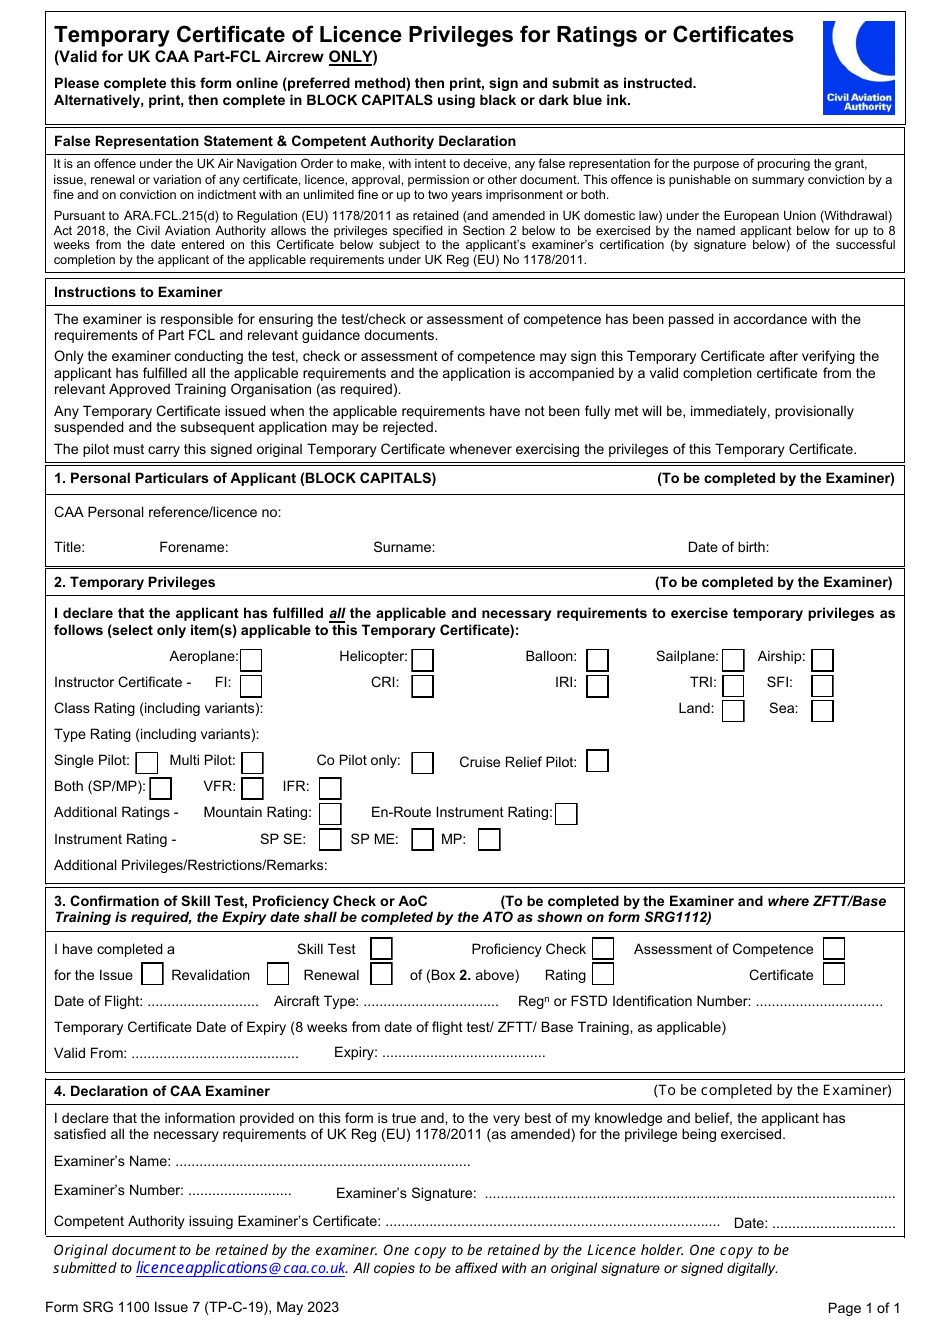 Form SRG1100 Temporary Certificate of Licence Privileges for Ratings or Certificates - United Kingdom, Page 1